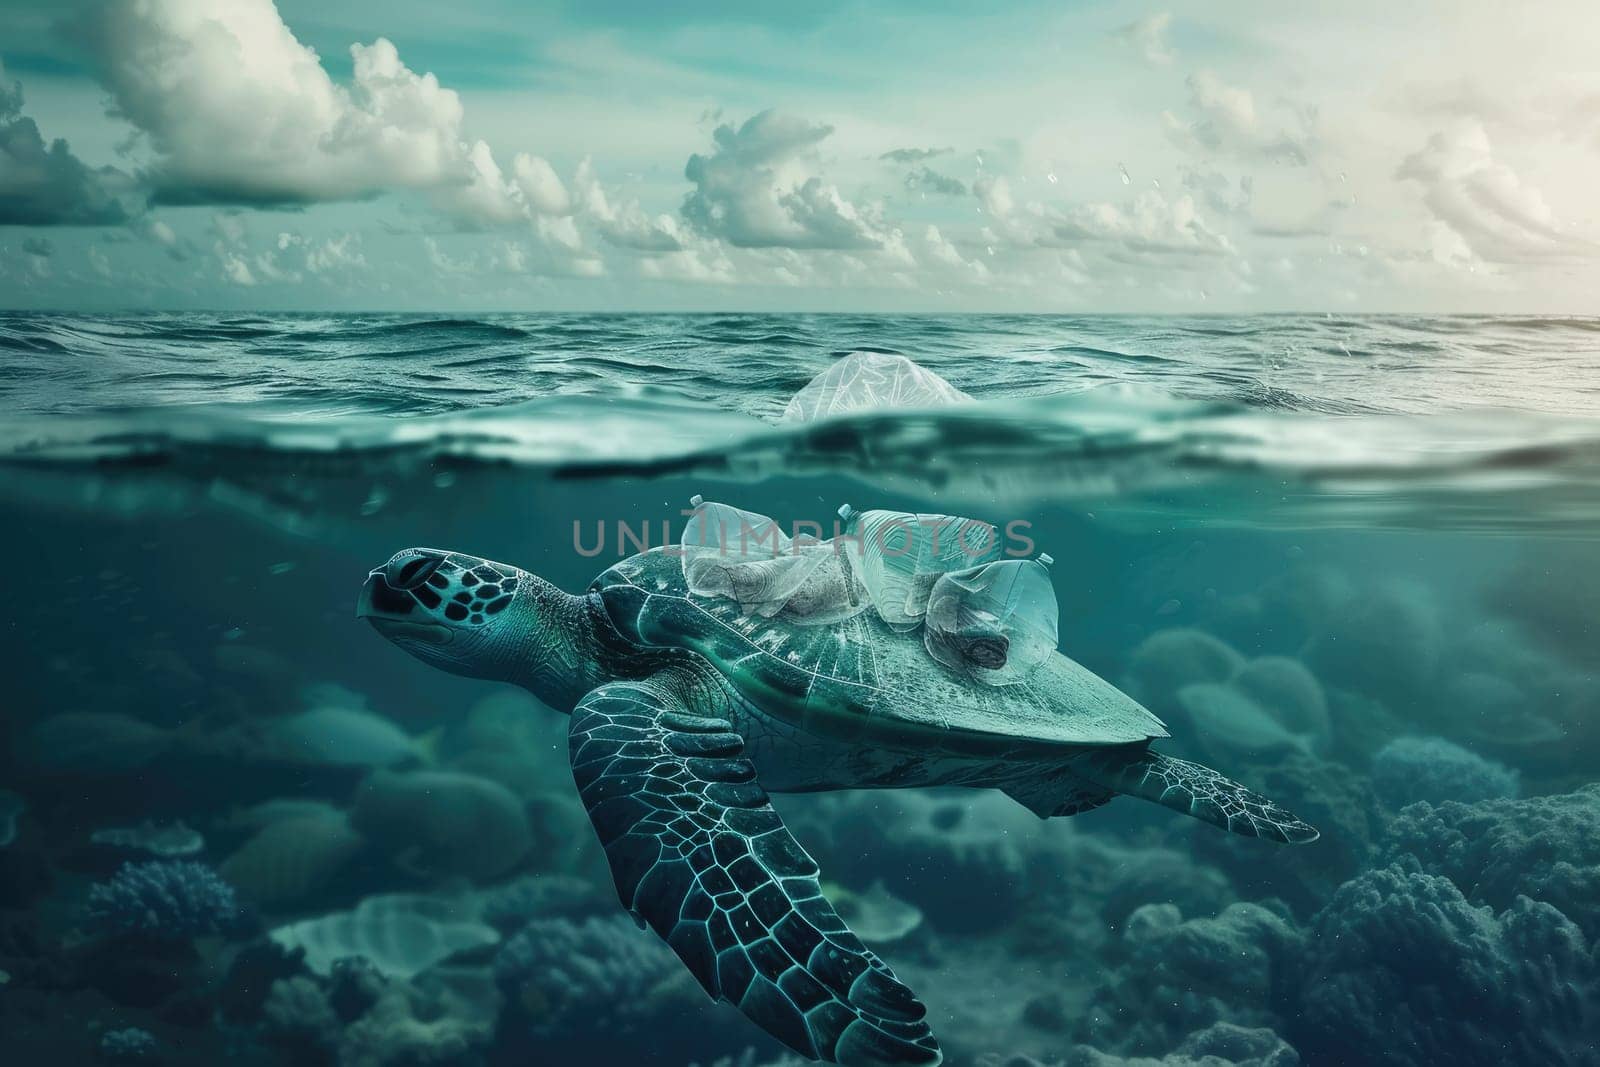 Plastic pollution in the ocean, Stop ocean plastic pollution, Save our ocean, Banner background.